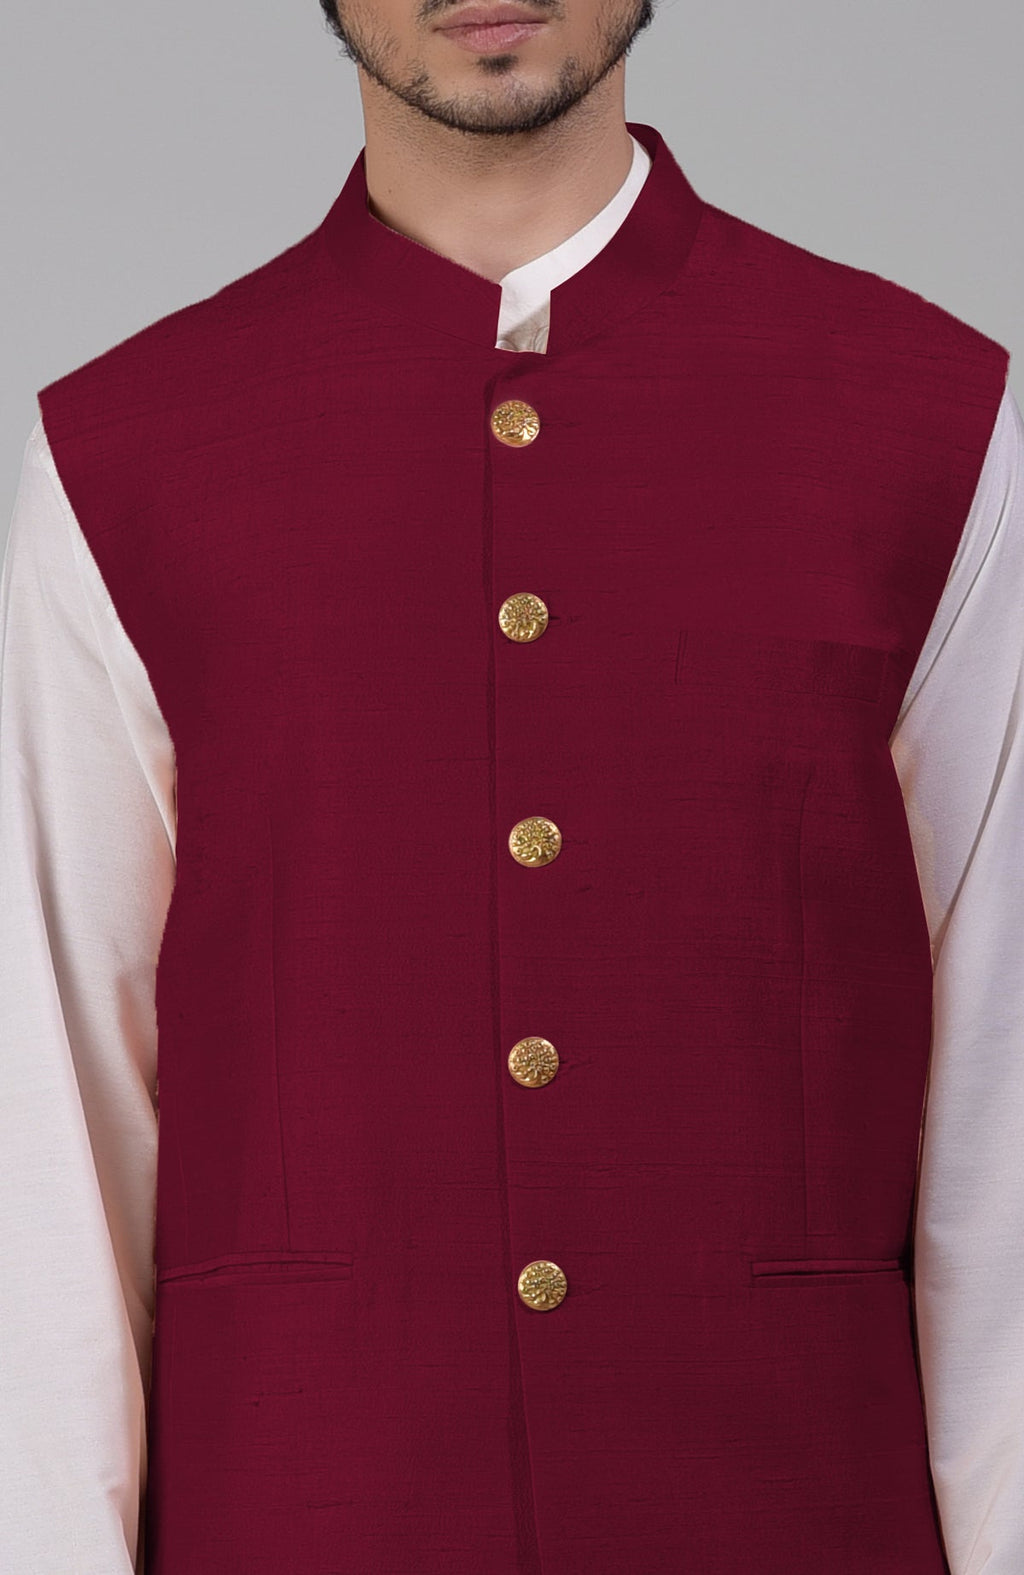 Best Kurta and Nehru Jacket Combination for Men to Look Stylish | Nihal  Fashions Blog